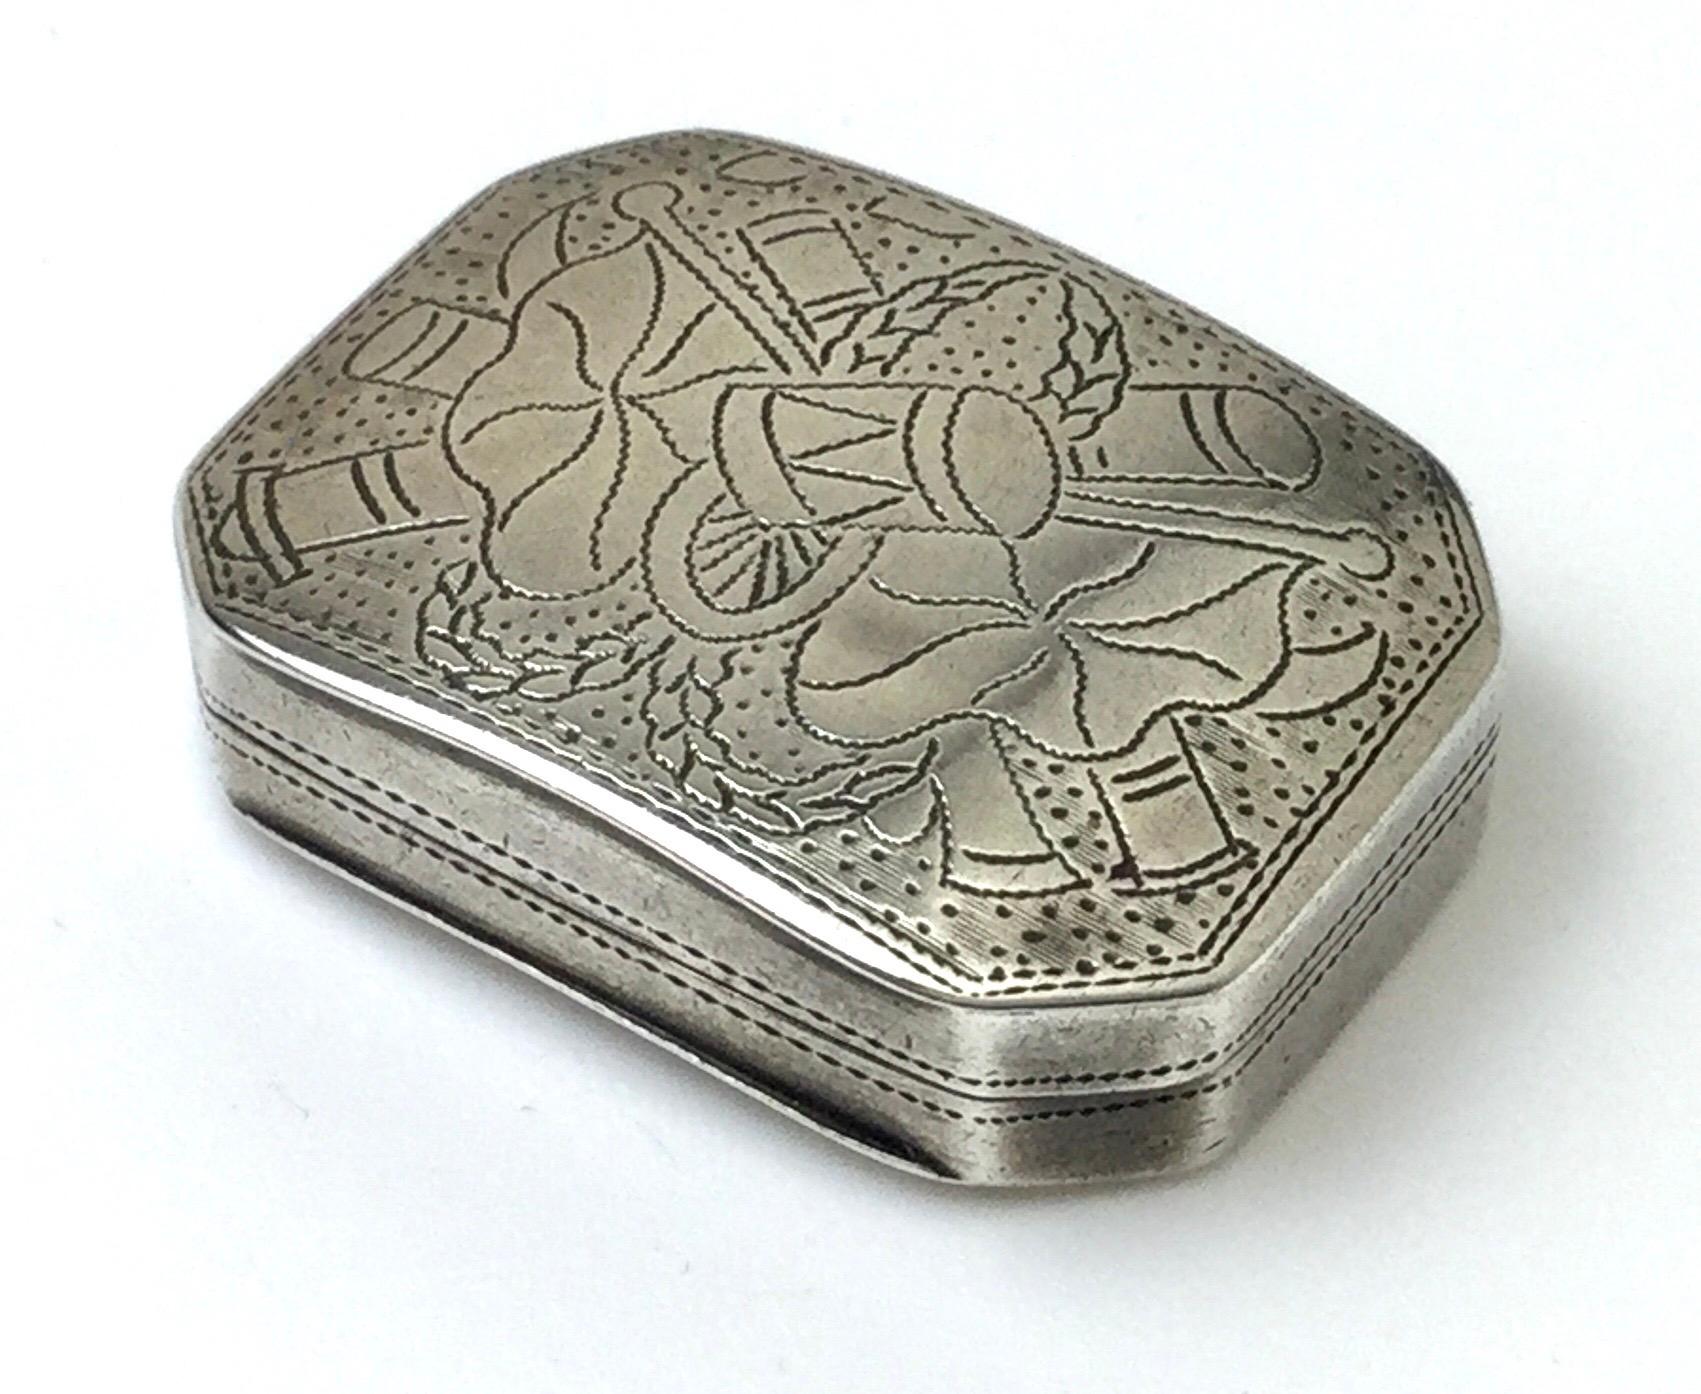 English sterling vinaigrette Birmingham 1814 by Samuel Pemberton. Original sponge inside. Age appropriate ware and scratched out name on the back. The case has a slight round to it. Size: 1 1/8” by 7/8” by 3/8” thick.